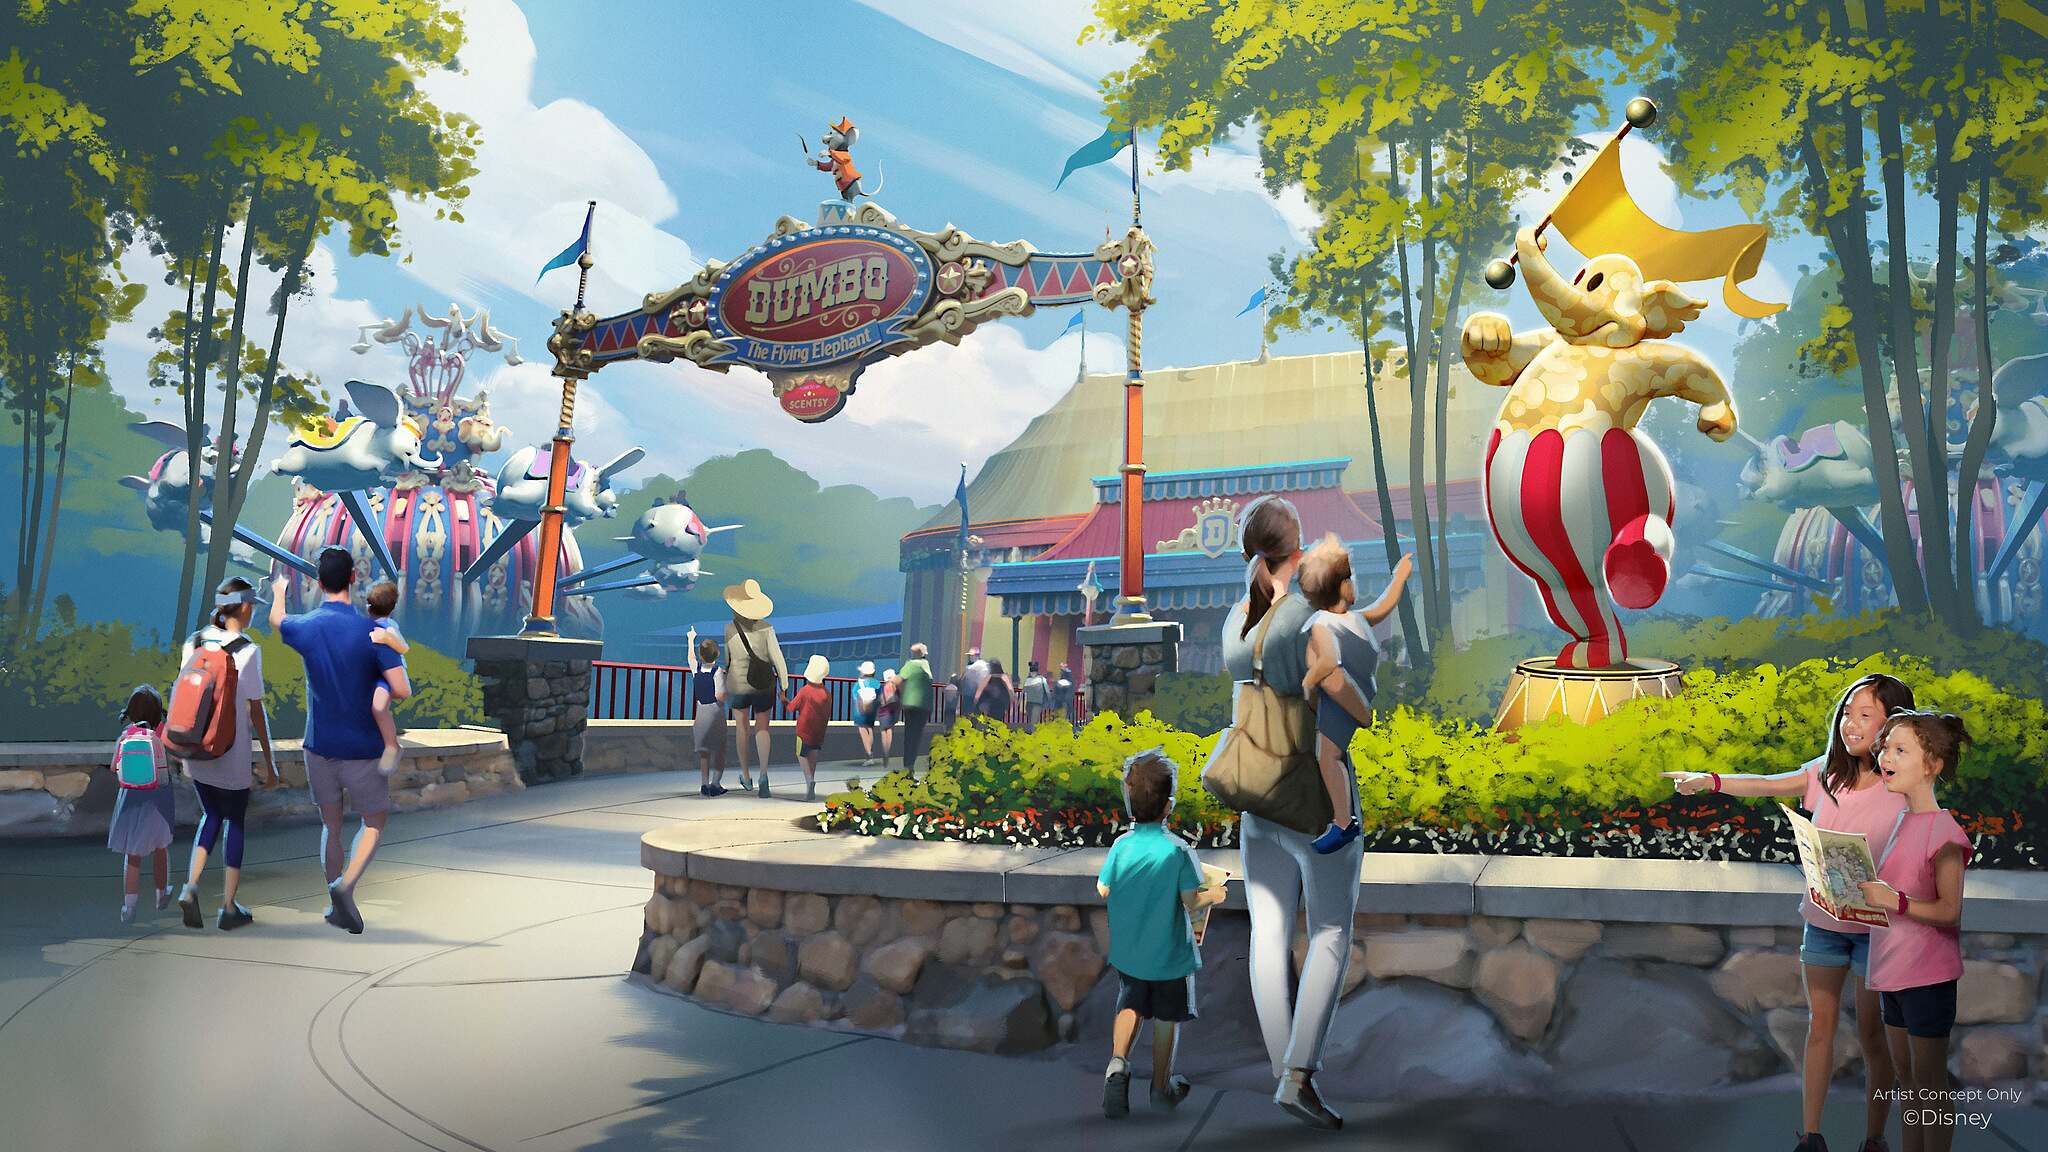 There’s an all-new interactive experience coming to Magic Kingdom!